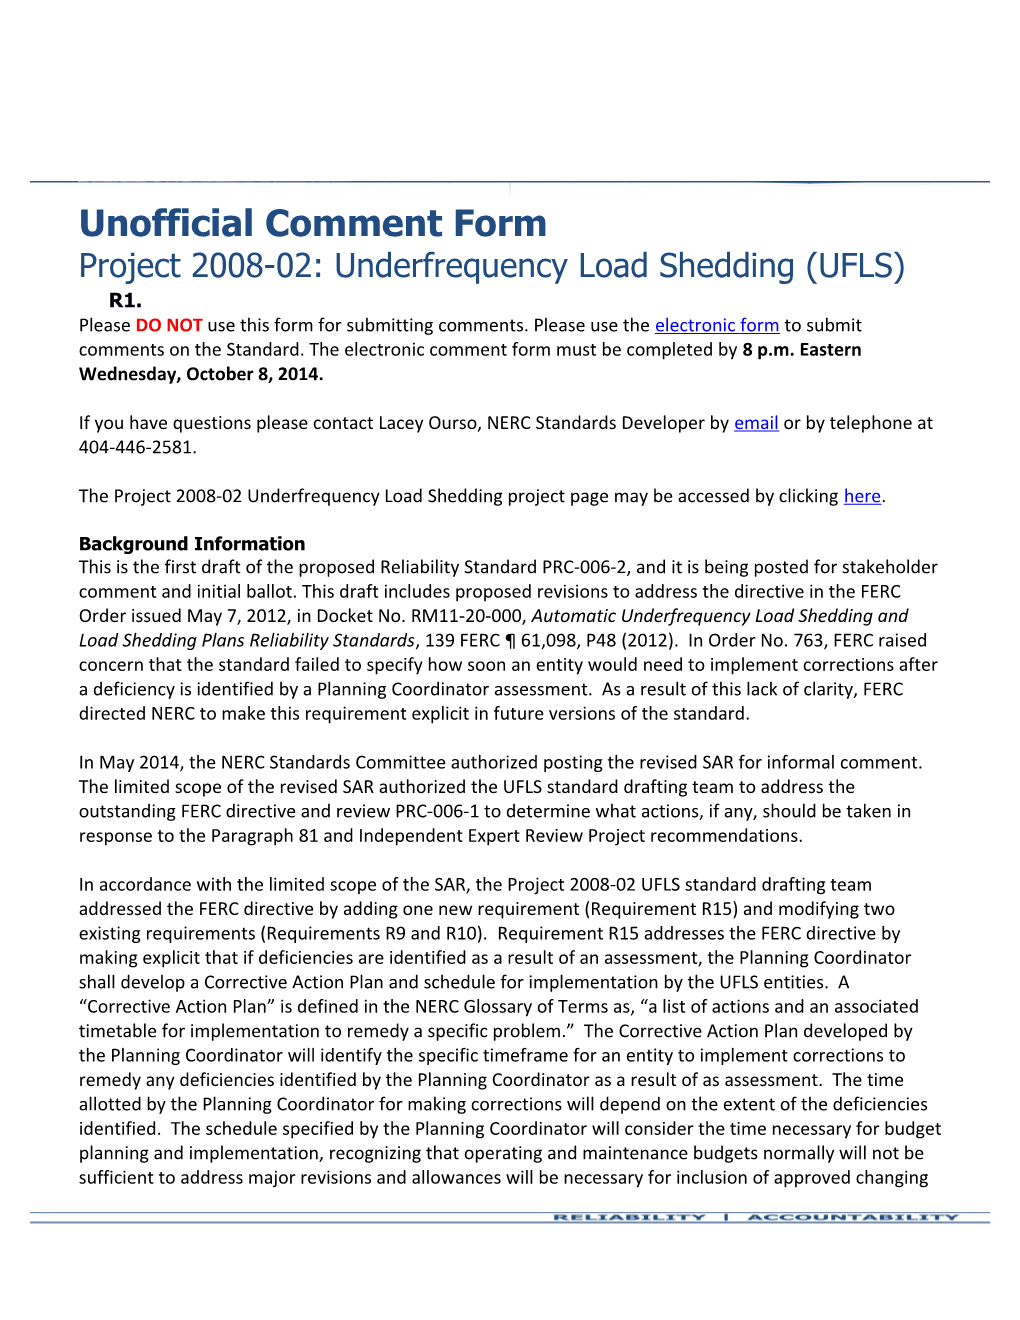 PRC-026-1 Unofficial Comment Form (Draft 1)